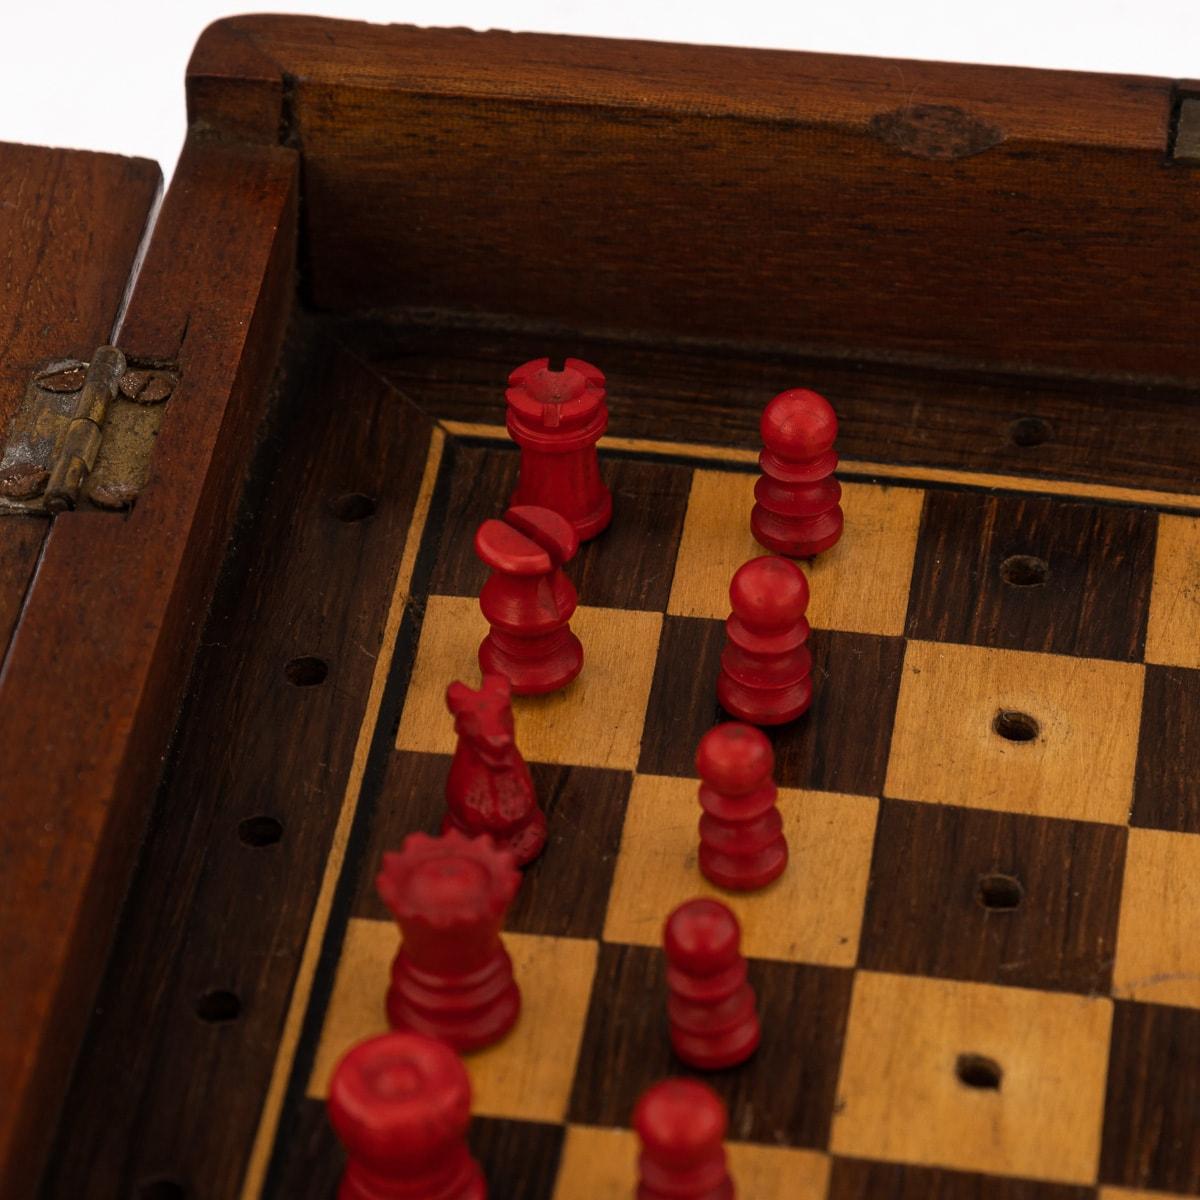 19th Century British Oak Cased Chess Set, Probably By Jacques, c.1890 For Sale 3